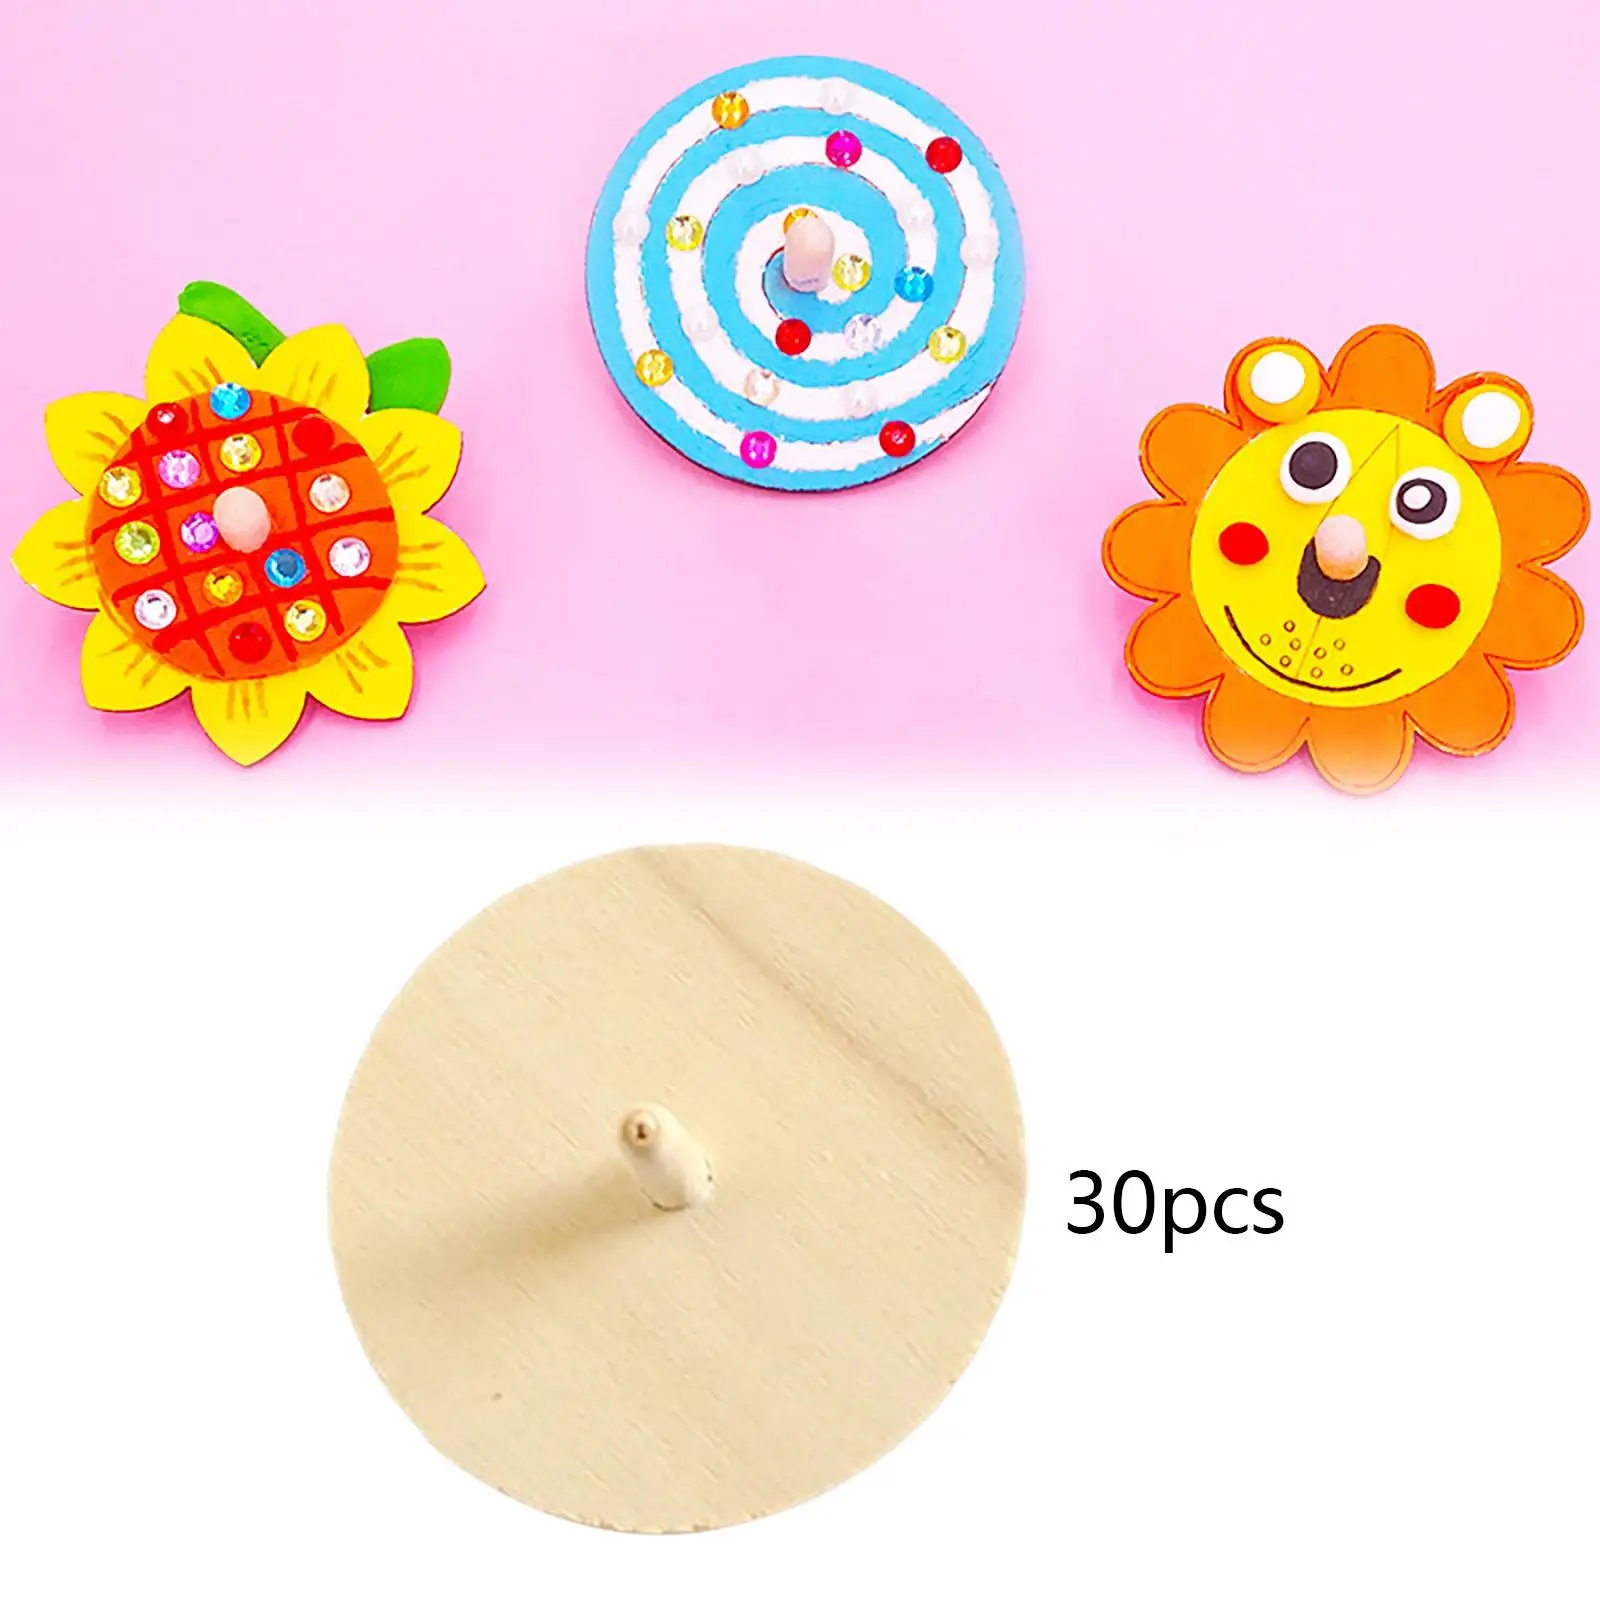 30Pcs Unfinished Wooden Spinner Top Gyro Toys Kids Handmade Peg Tops Classic Balance Toy Painting DIY Art for Toddlers Children